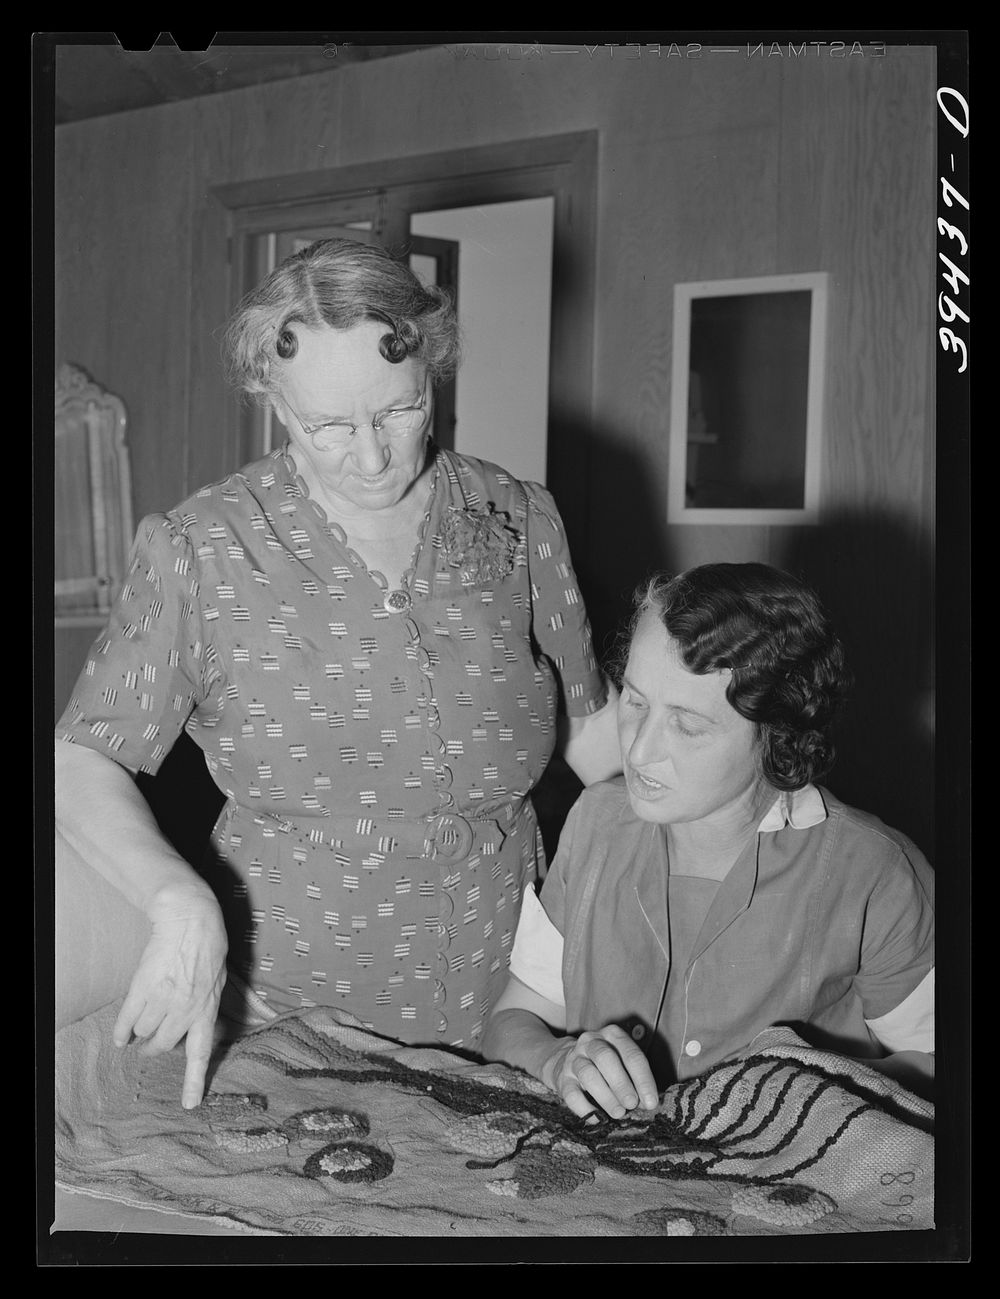 In the sewing class at the FSA (Farm Security Administration) labor camp. Caldwell, Idaho. This is a WPA (Work Projects…